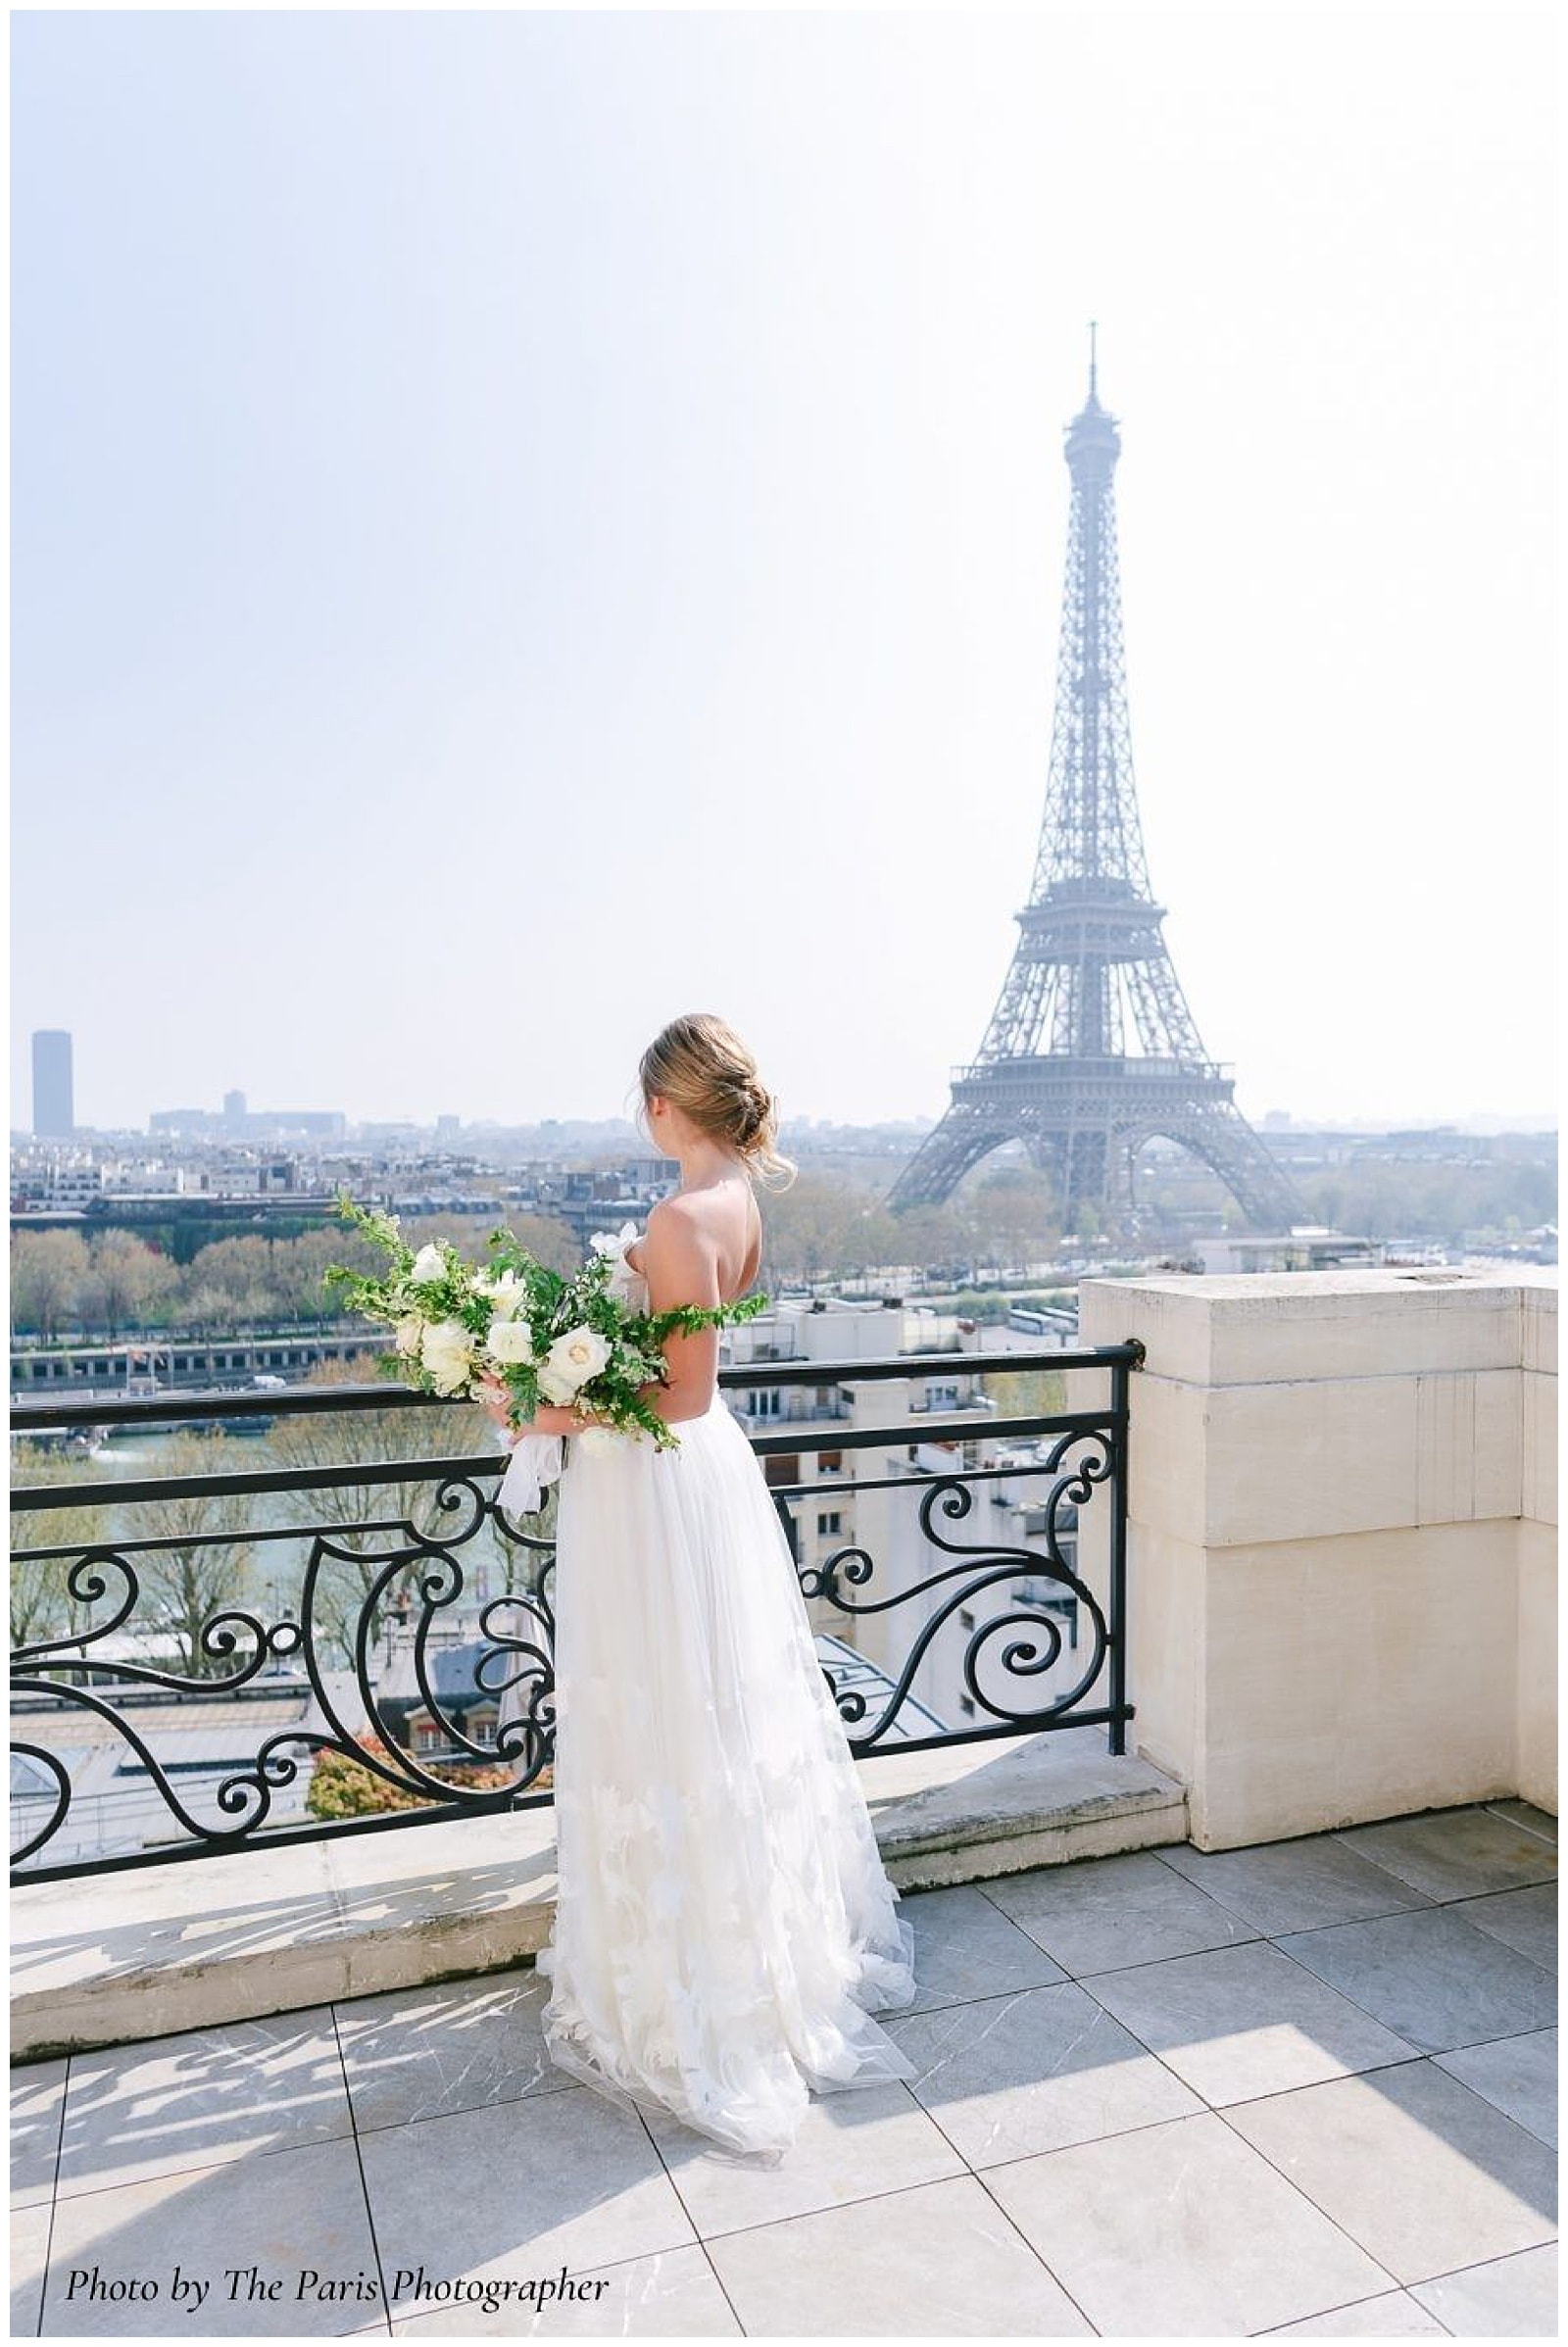 Samantha Bottelier Events is the planner to hire if you're thinking of planning a wedding in Paris! 